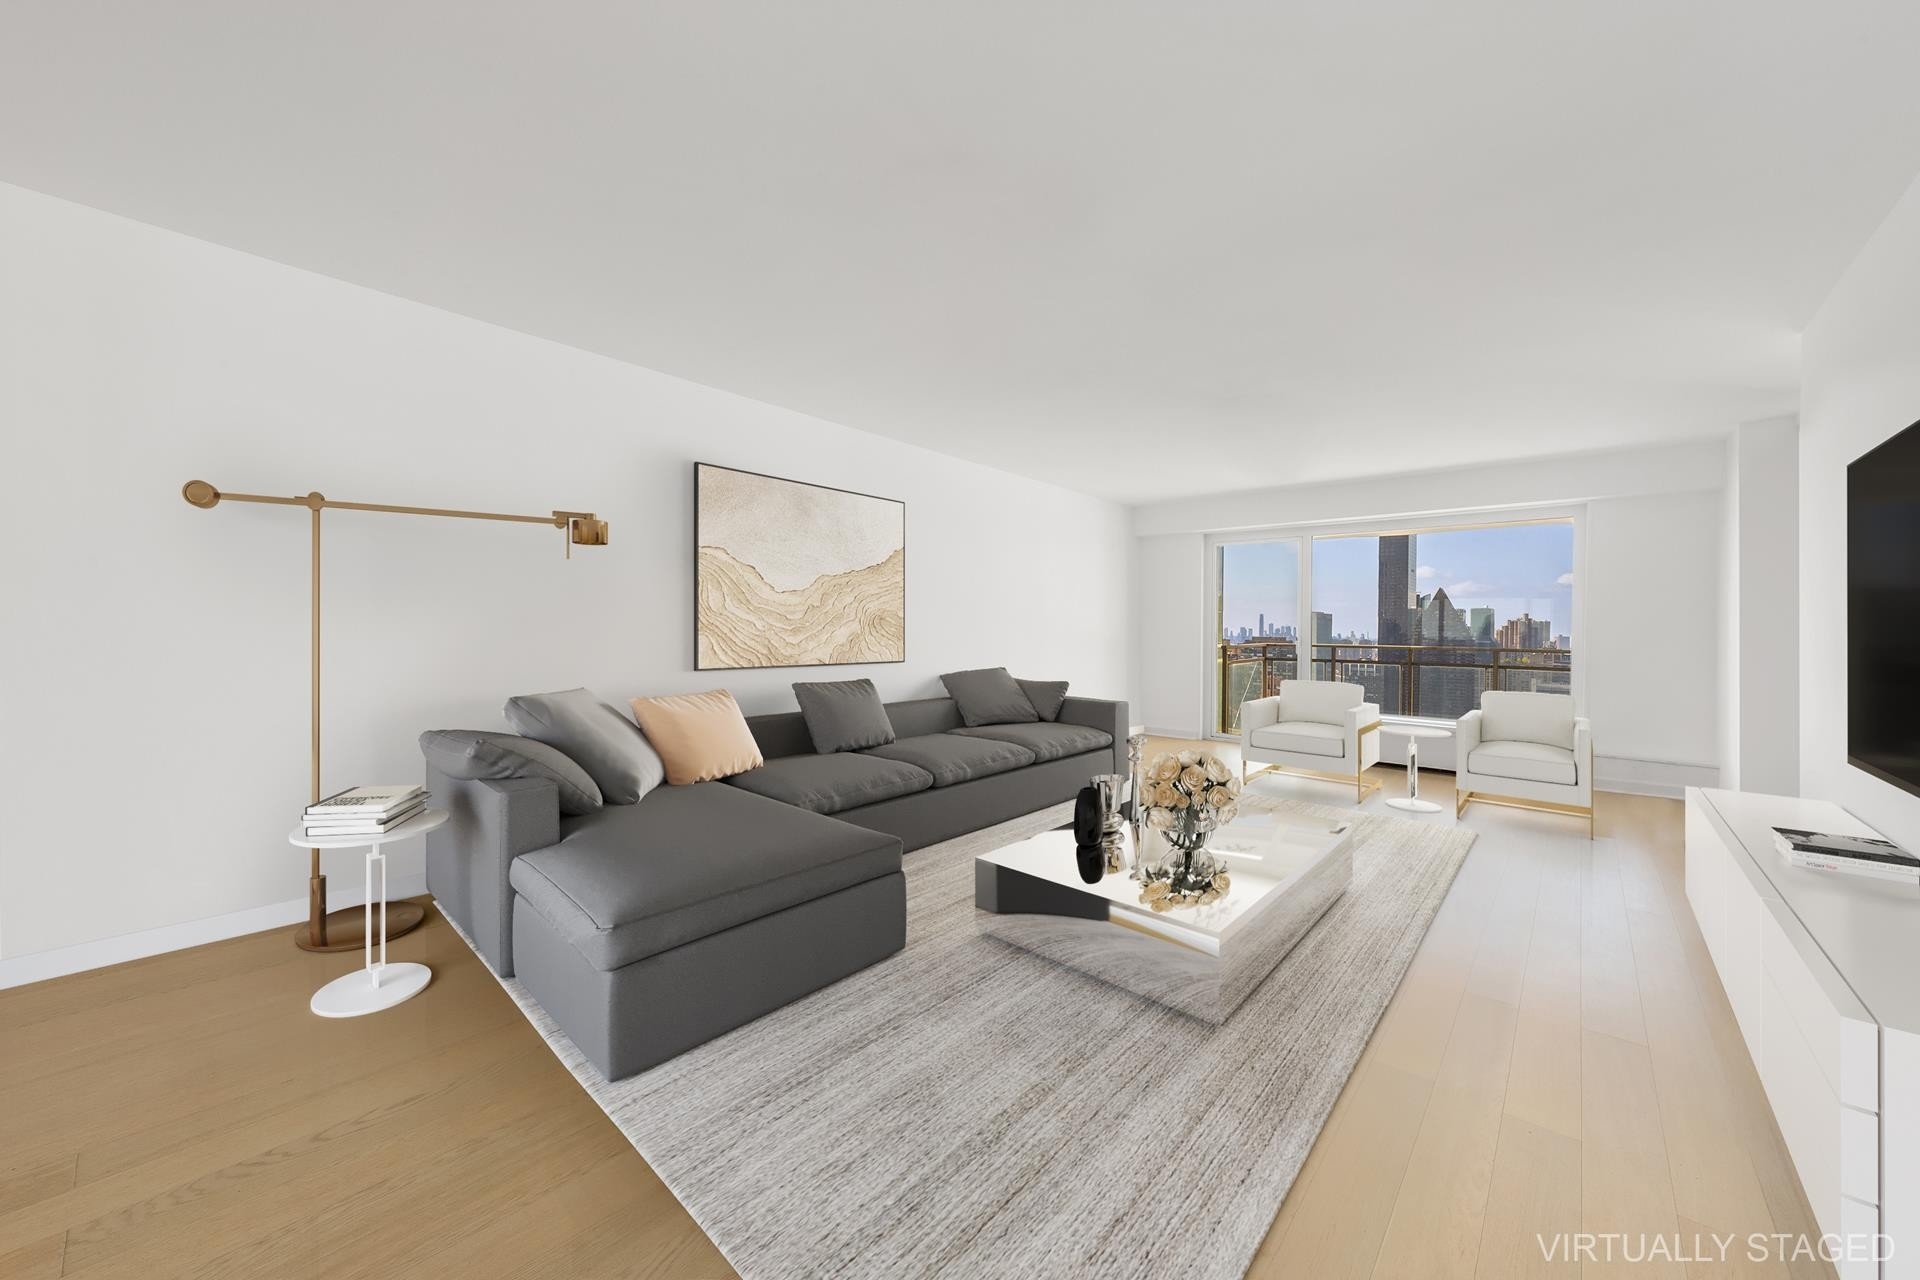 Co-op Properties for Sale at The Excelsior, 303 E 57TH ST, 41G Midtown East, New York, New York 10022